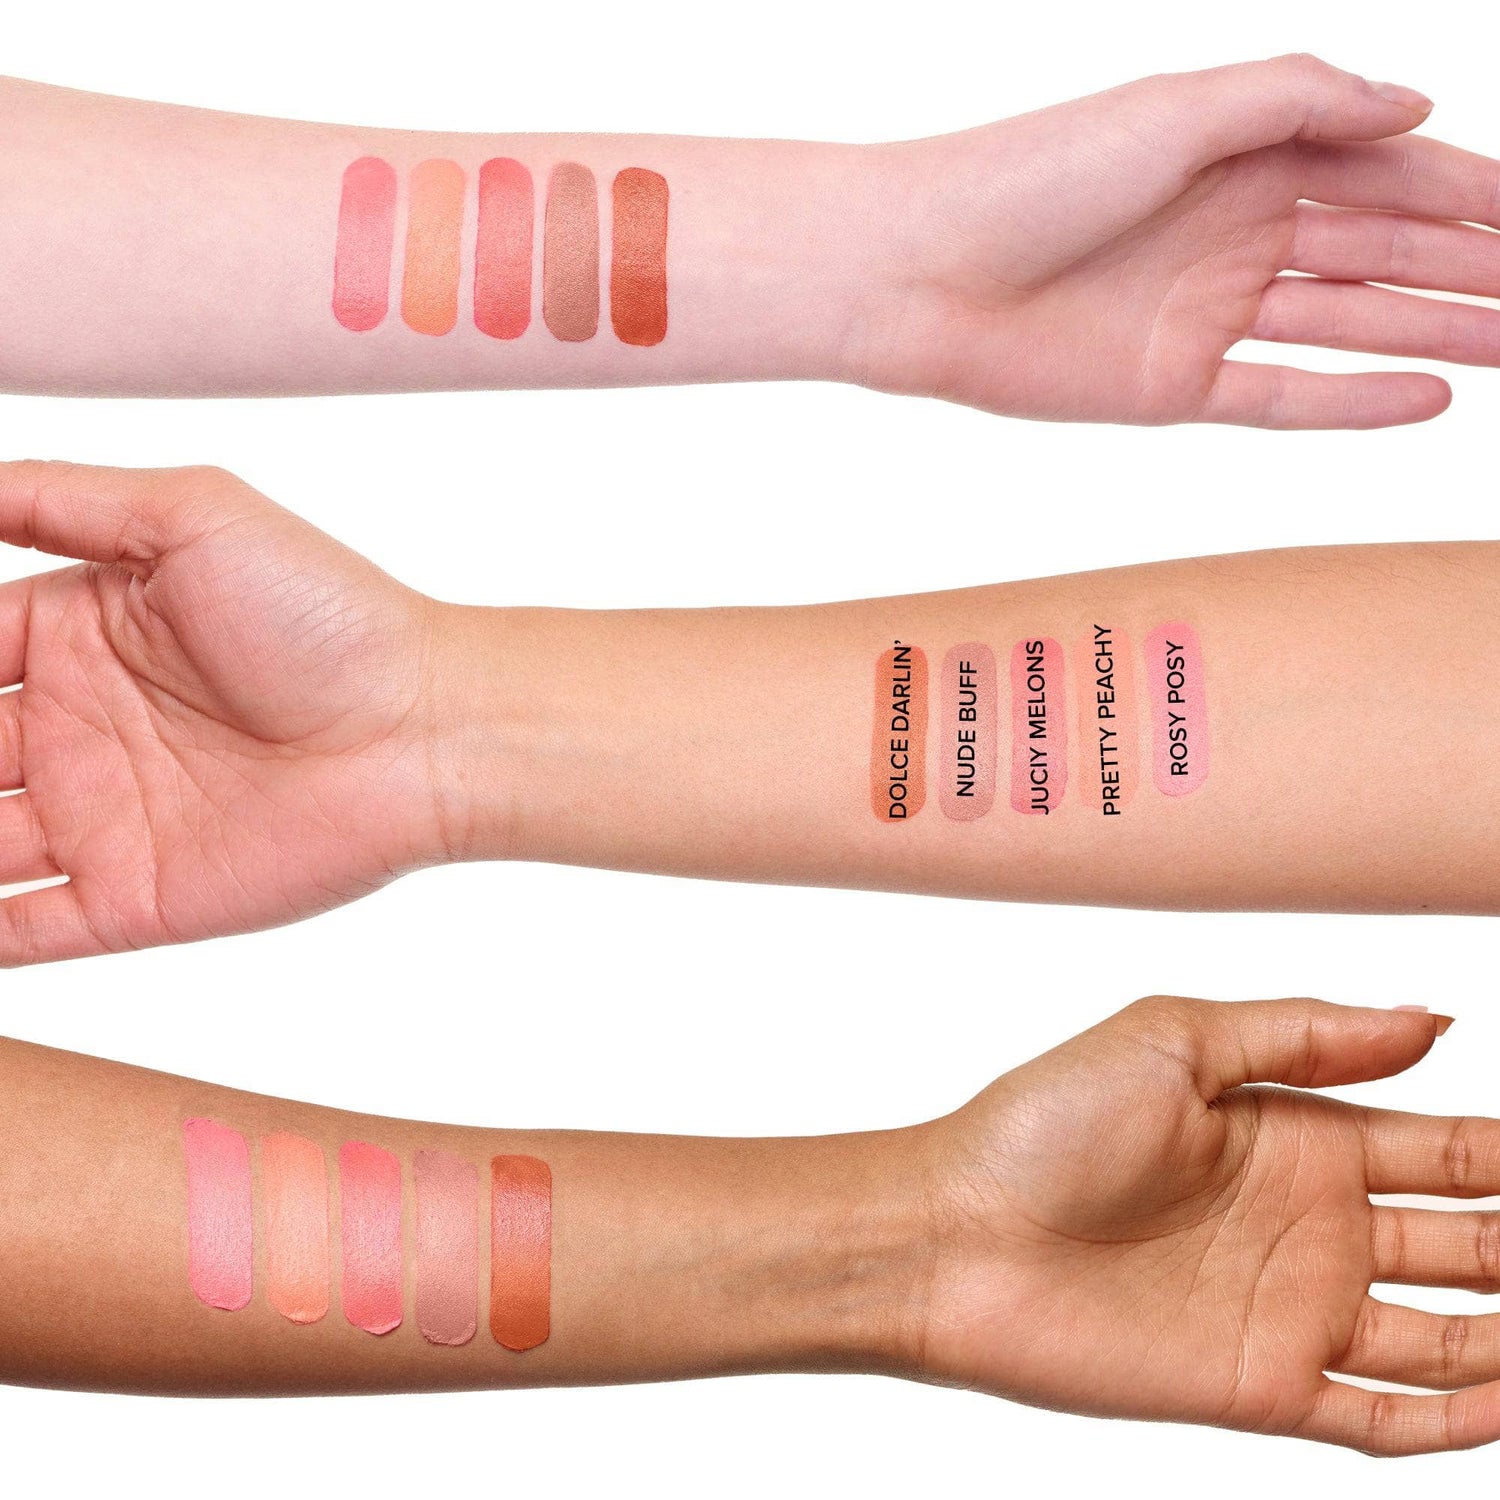 Arms in different skin tones with Nudies Matte Lux Dolce Darlin' swatch-7